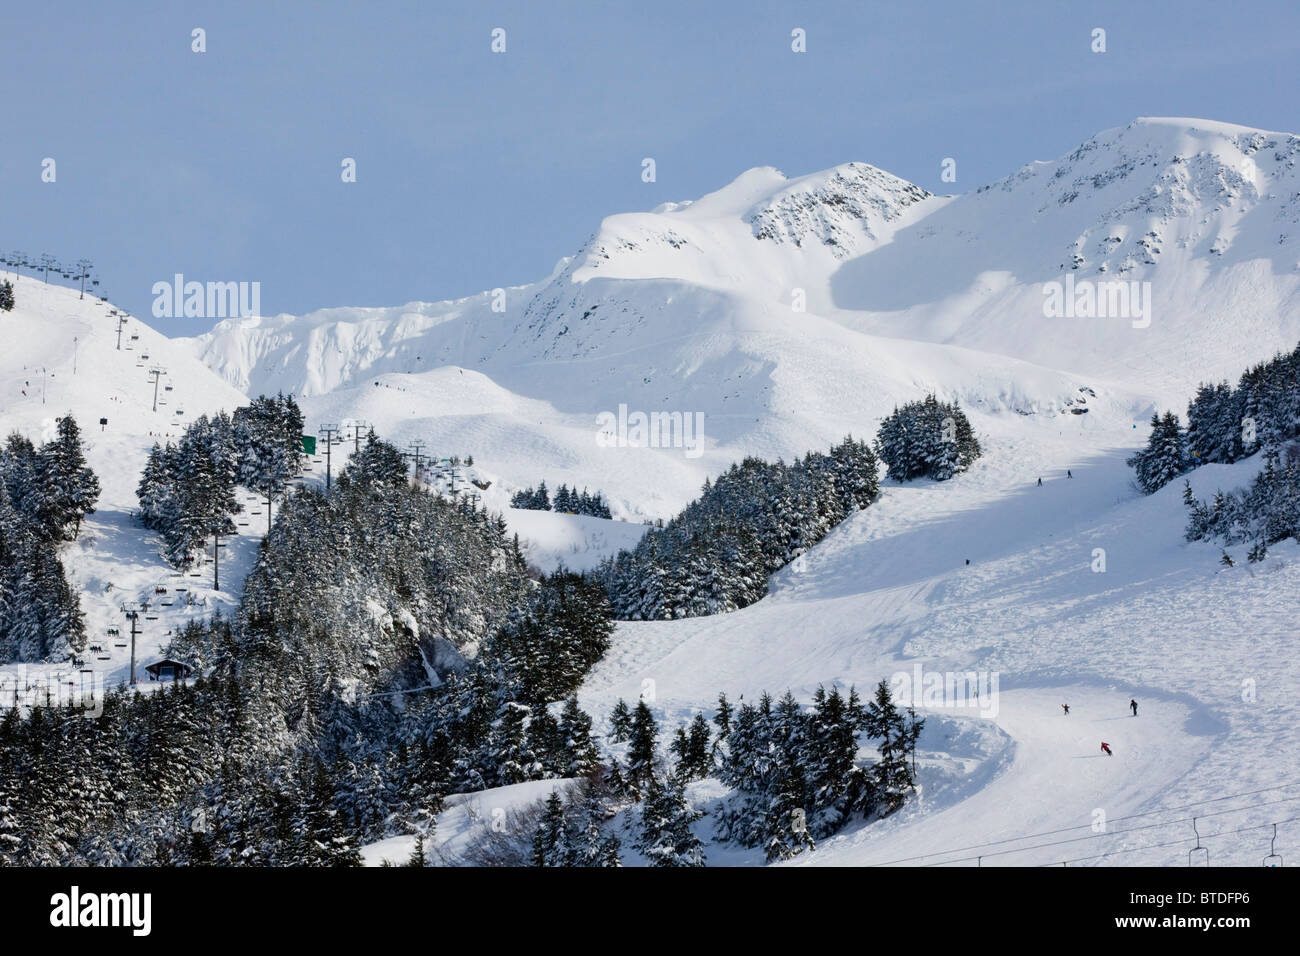 View of downhill skiiers on the slope of Mt. Alyeska at the Alyeska Resort in Girdwood, Southcentral Alaska, Winter Stock Photo